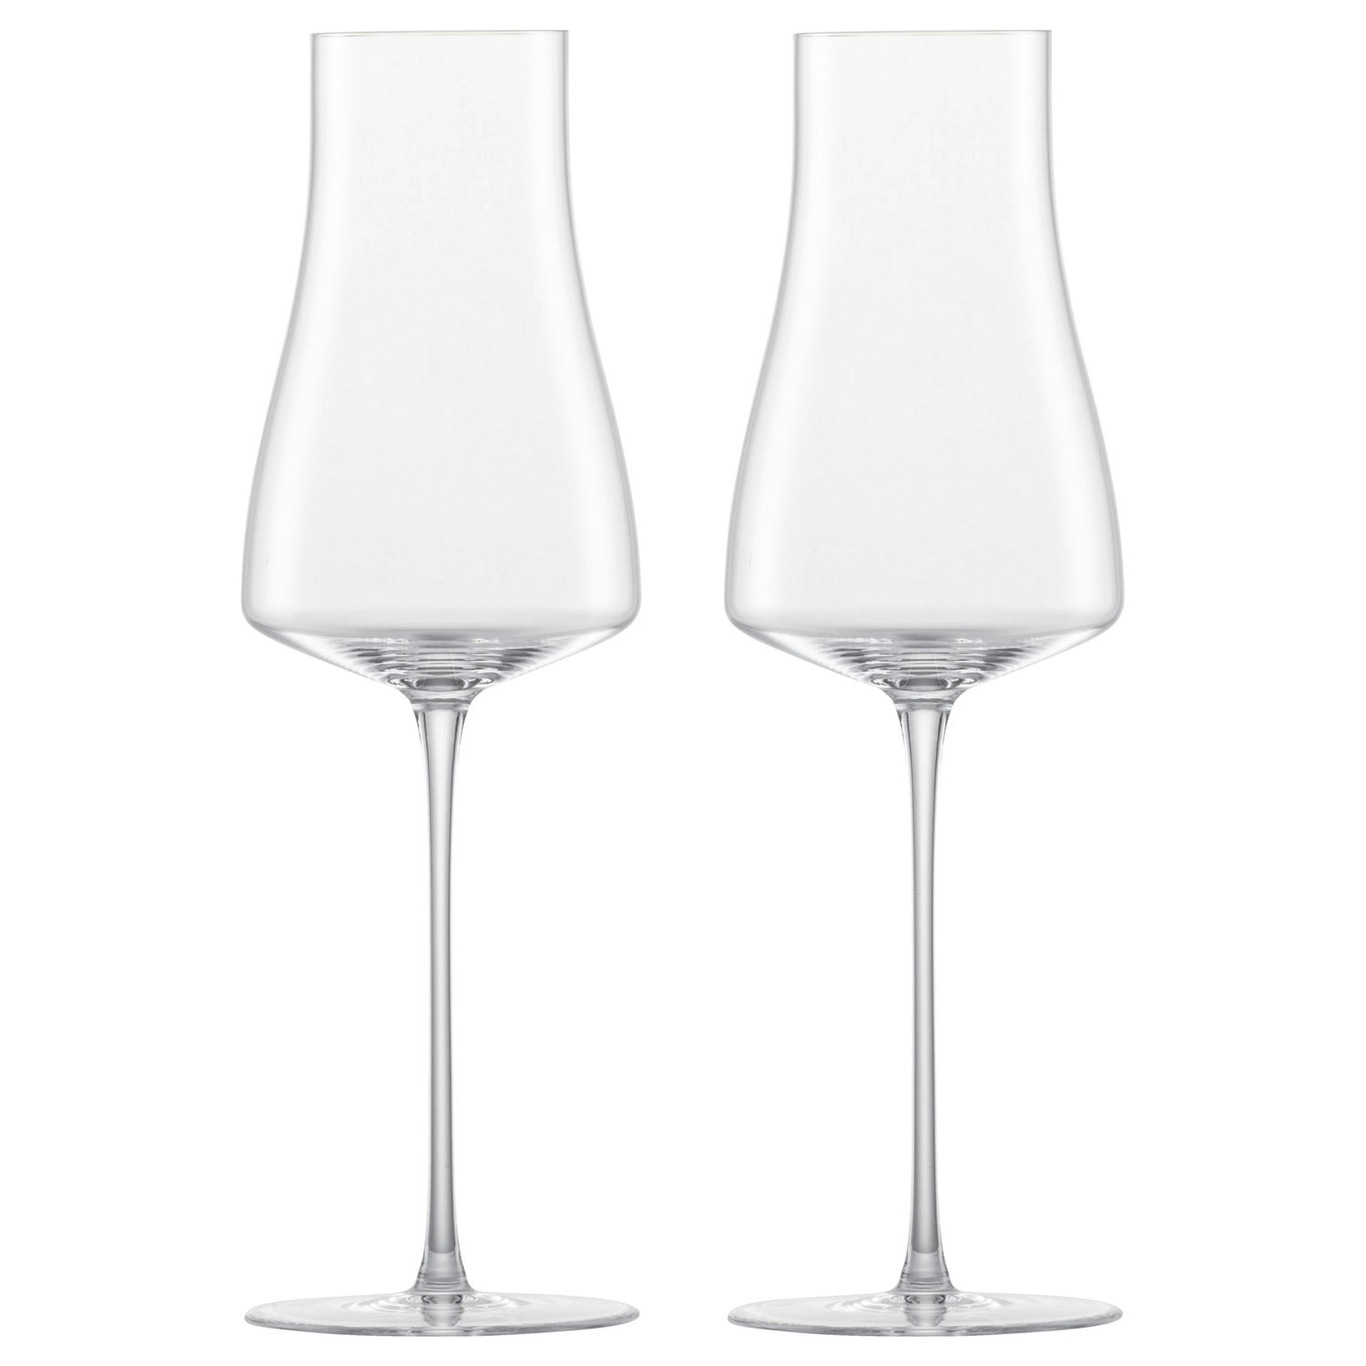 The Moment Blanc de Blancs Champagne Glass 31 cl, 2-pack